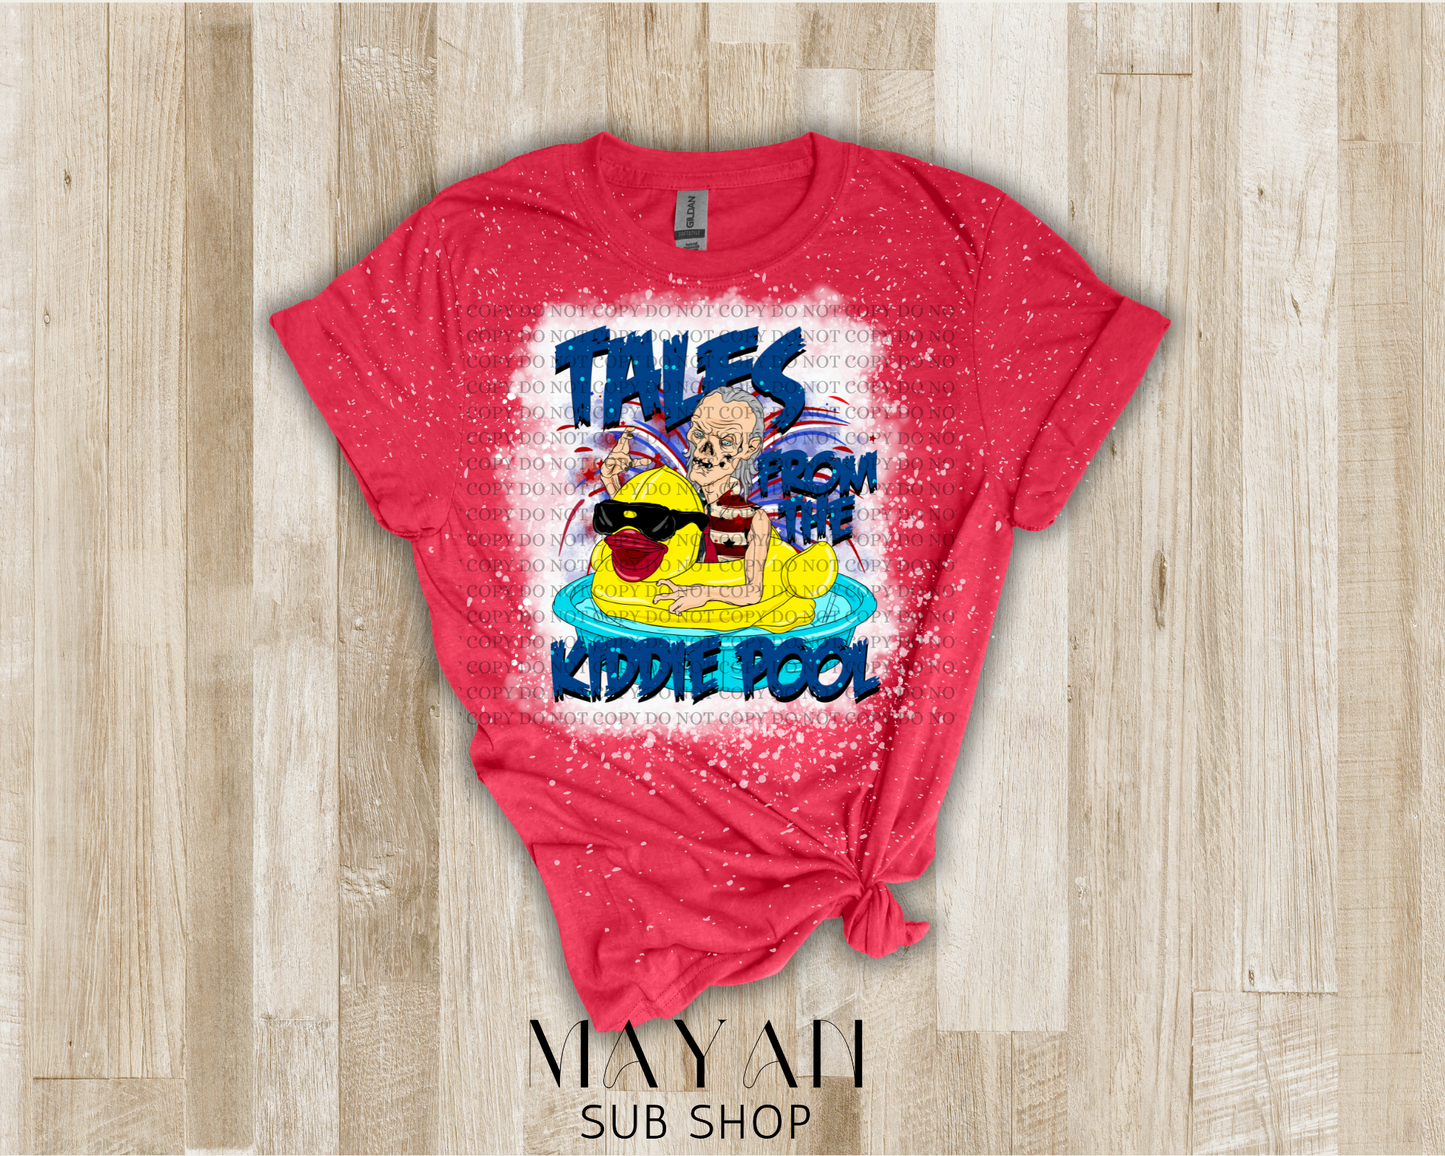 Tales from the kiddie pool bleached shirt - Mayan Sub Shop